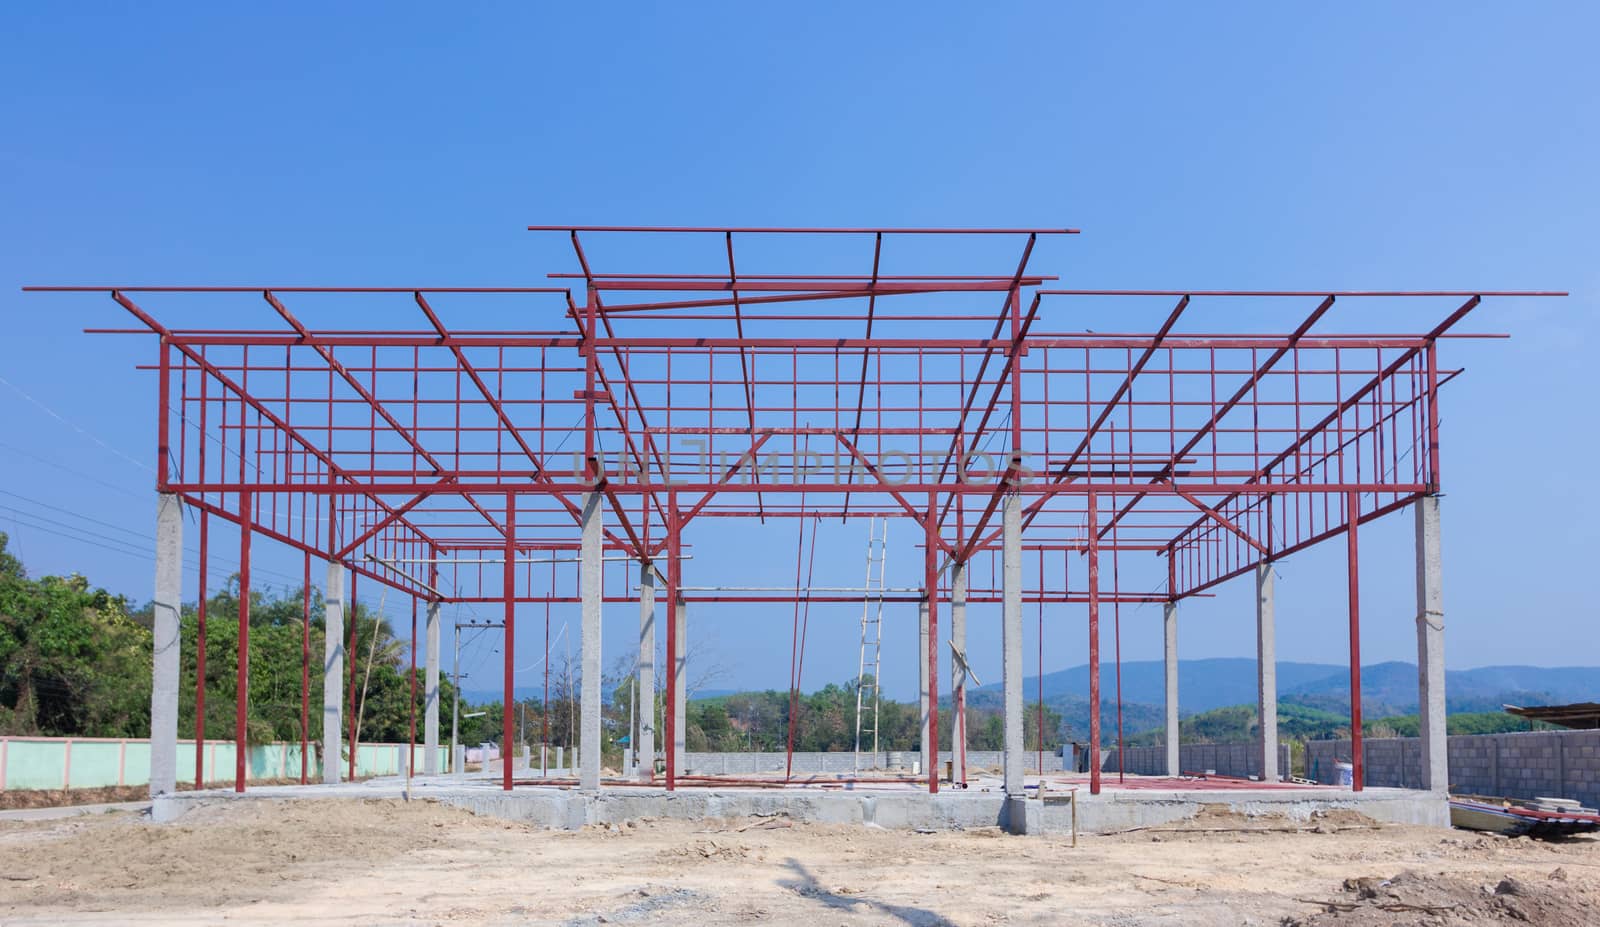 Construction site with building and steelwork